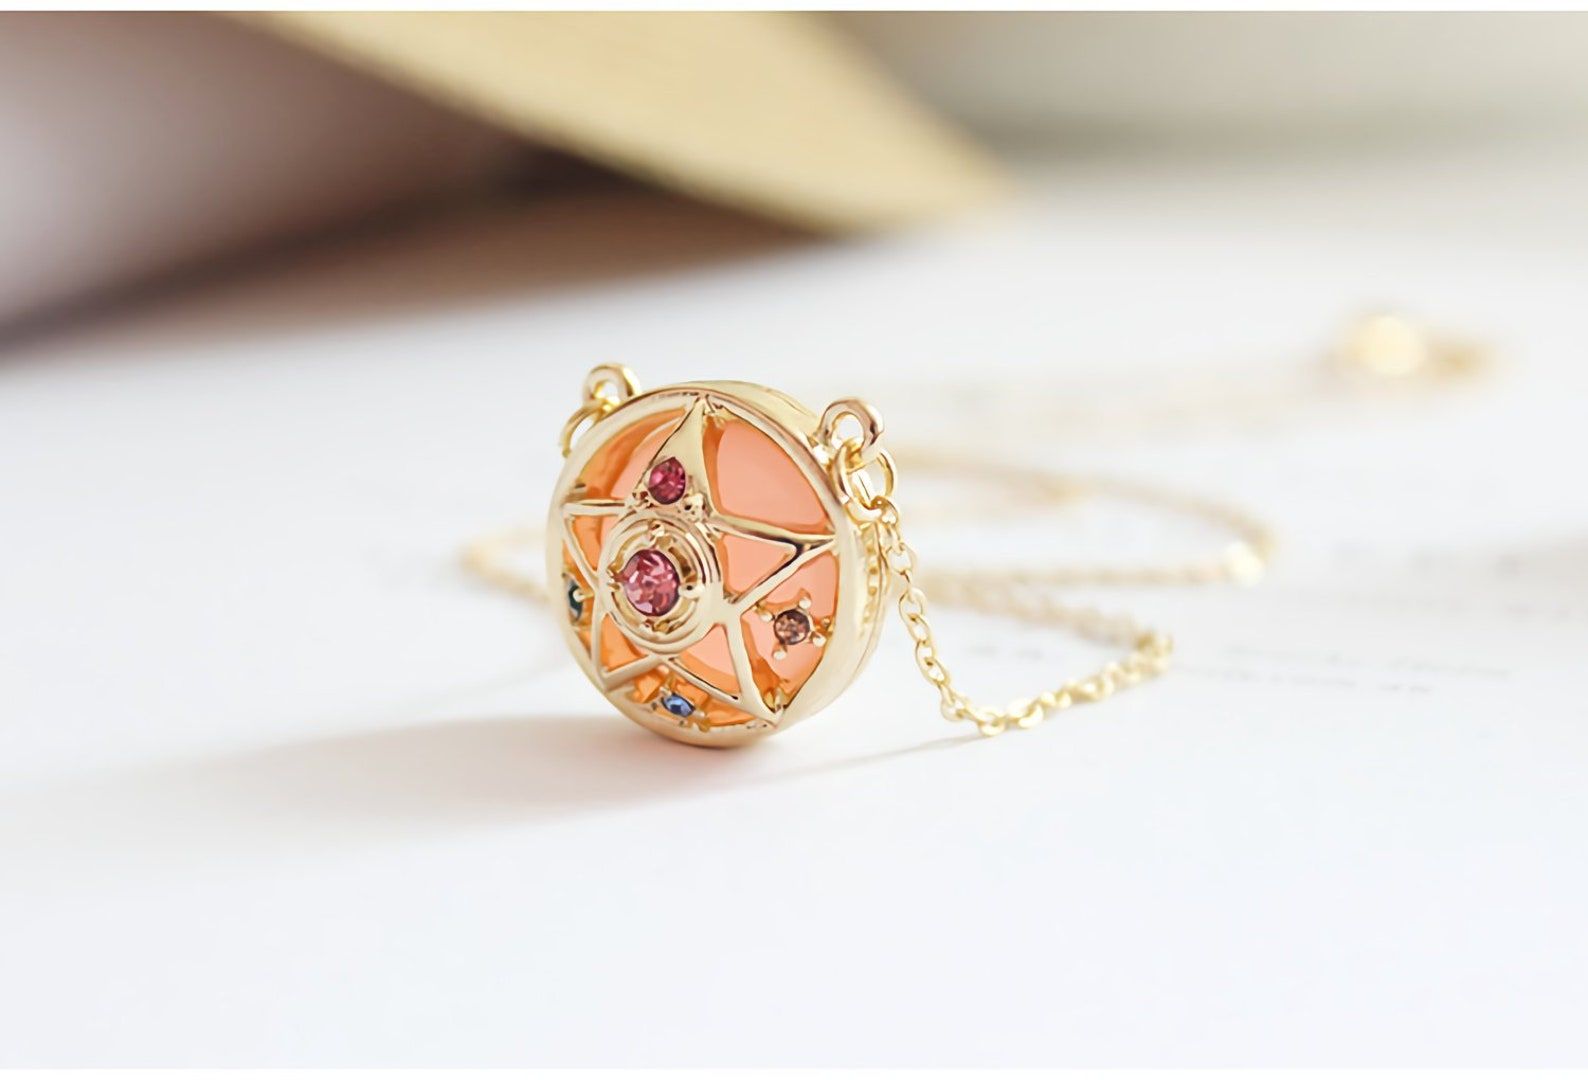 sailor moon crystal star inspired necklace